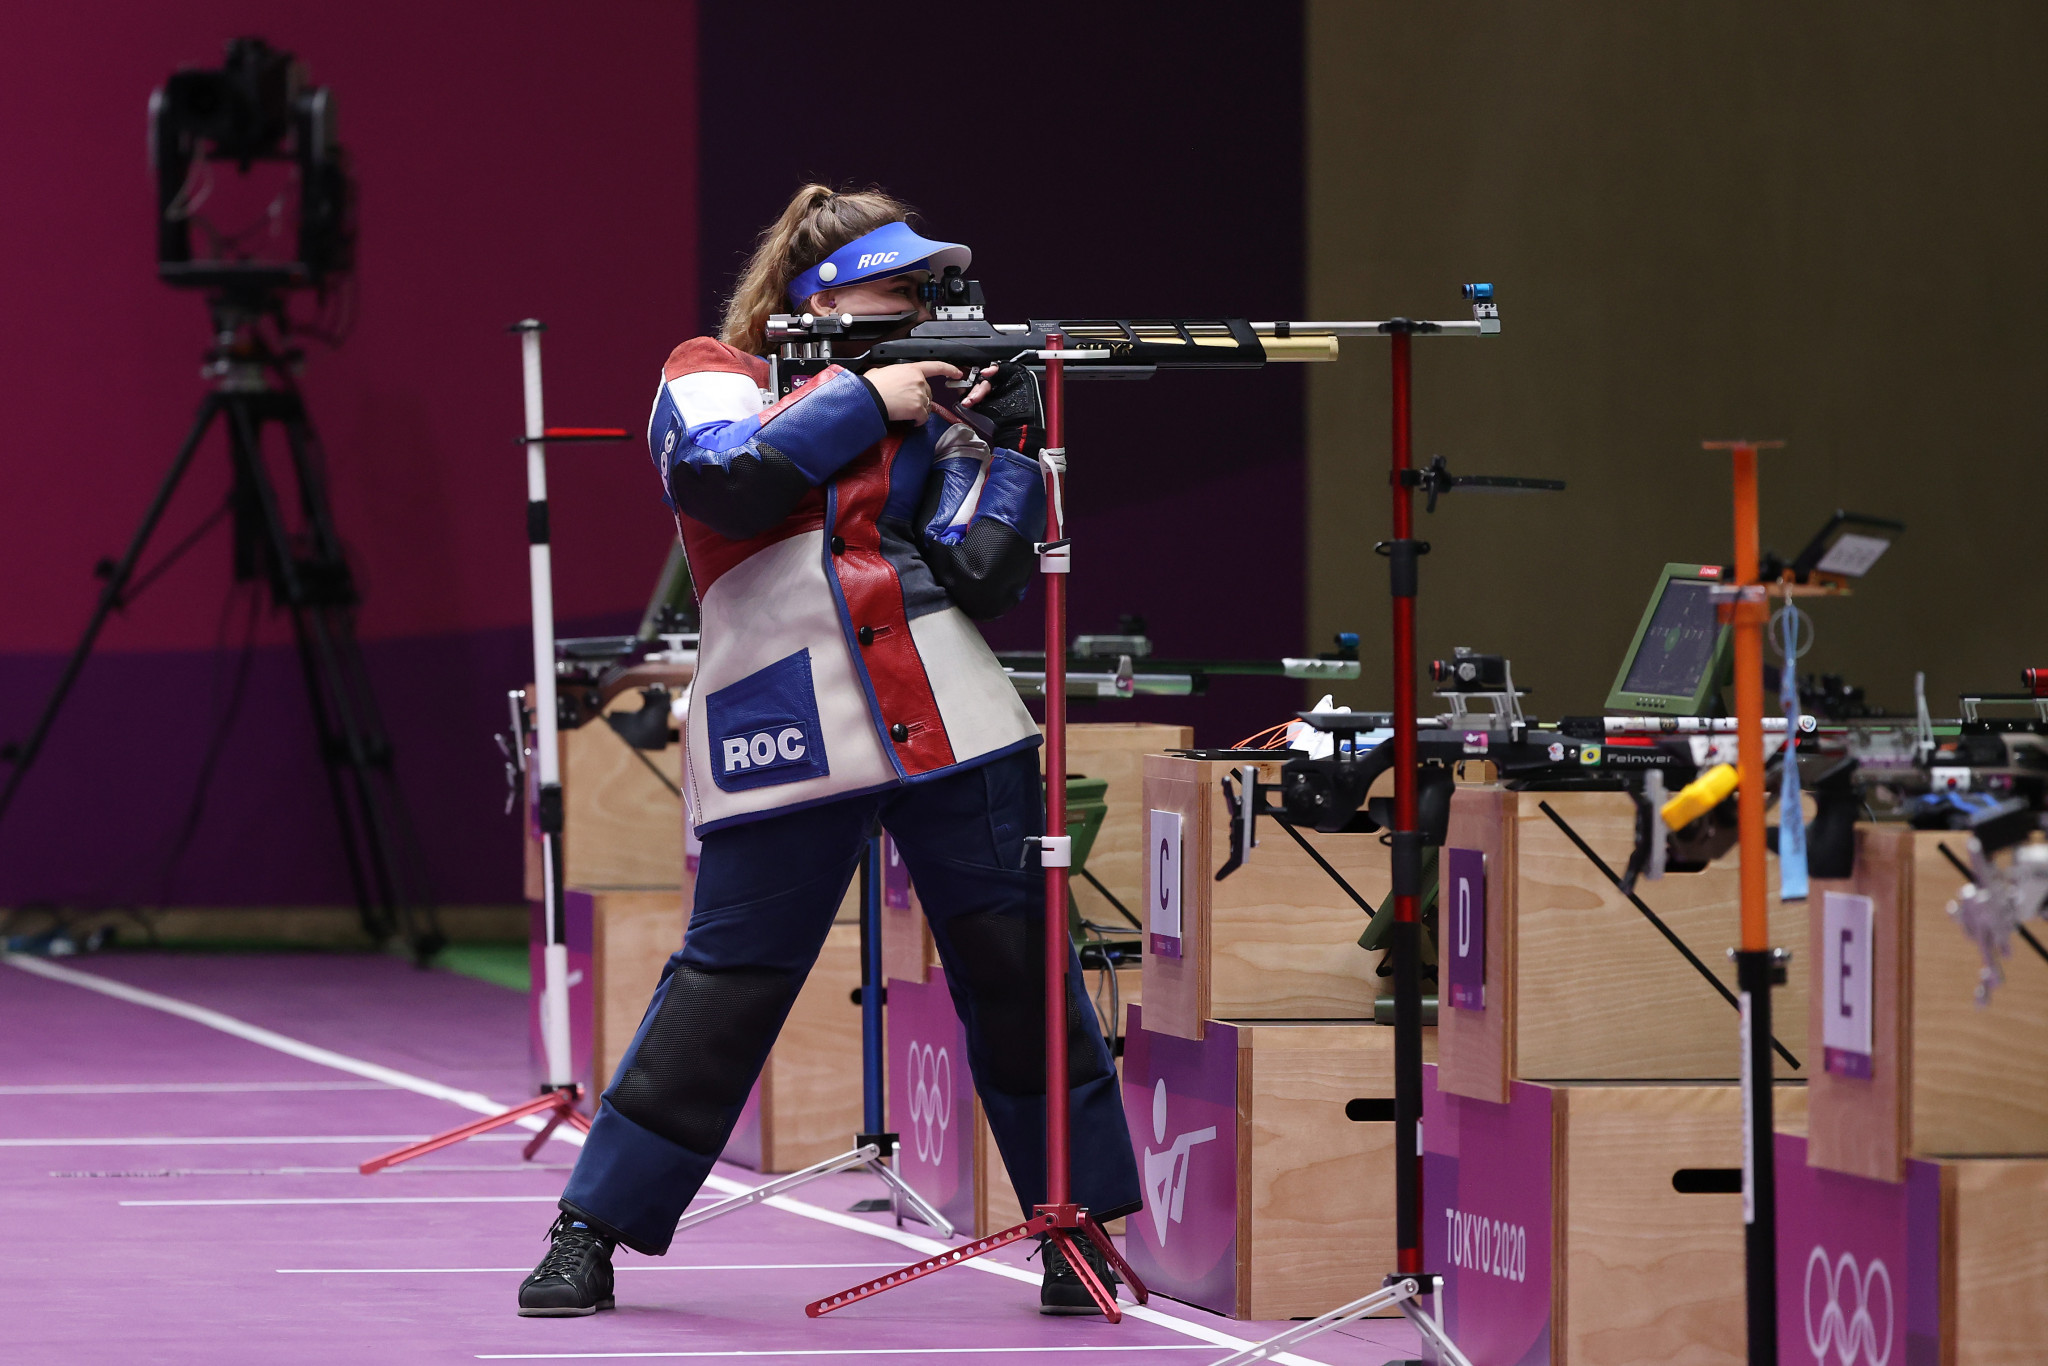 Tokyo 2020 women's 10m air rifle silver medallist Anastasiia Galashina is on the start list for the ISSF 10m Grand Prix in Ruše ©Getty Images